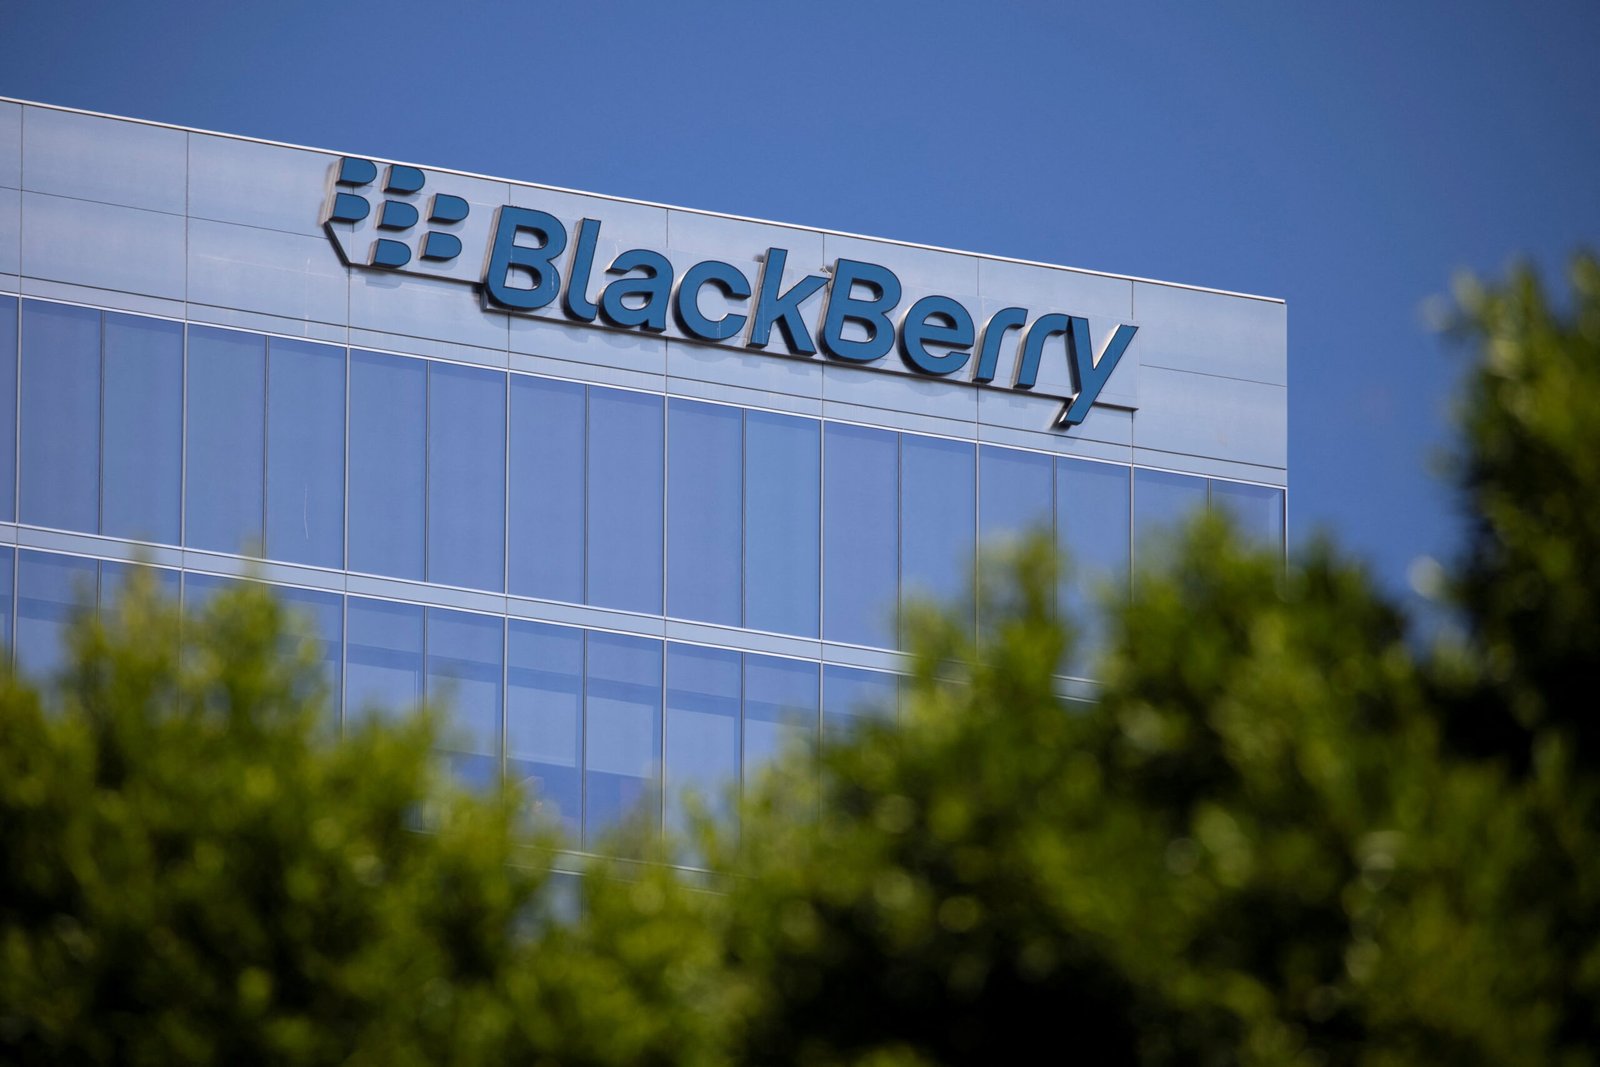 private-equity-firm-veritas-makes-a-takeover-offer-for-blackberry,-source-says